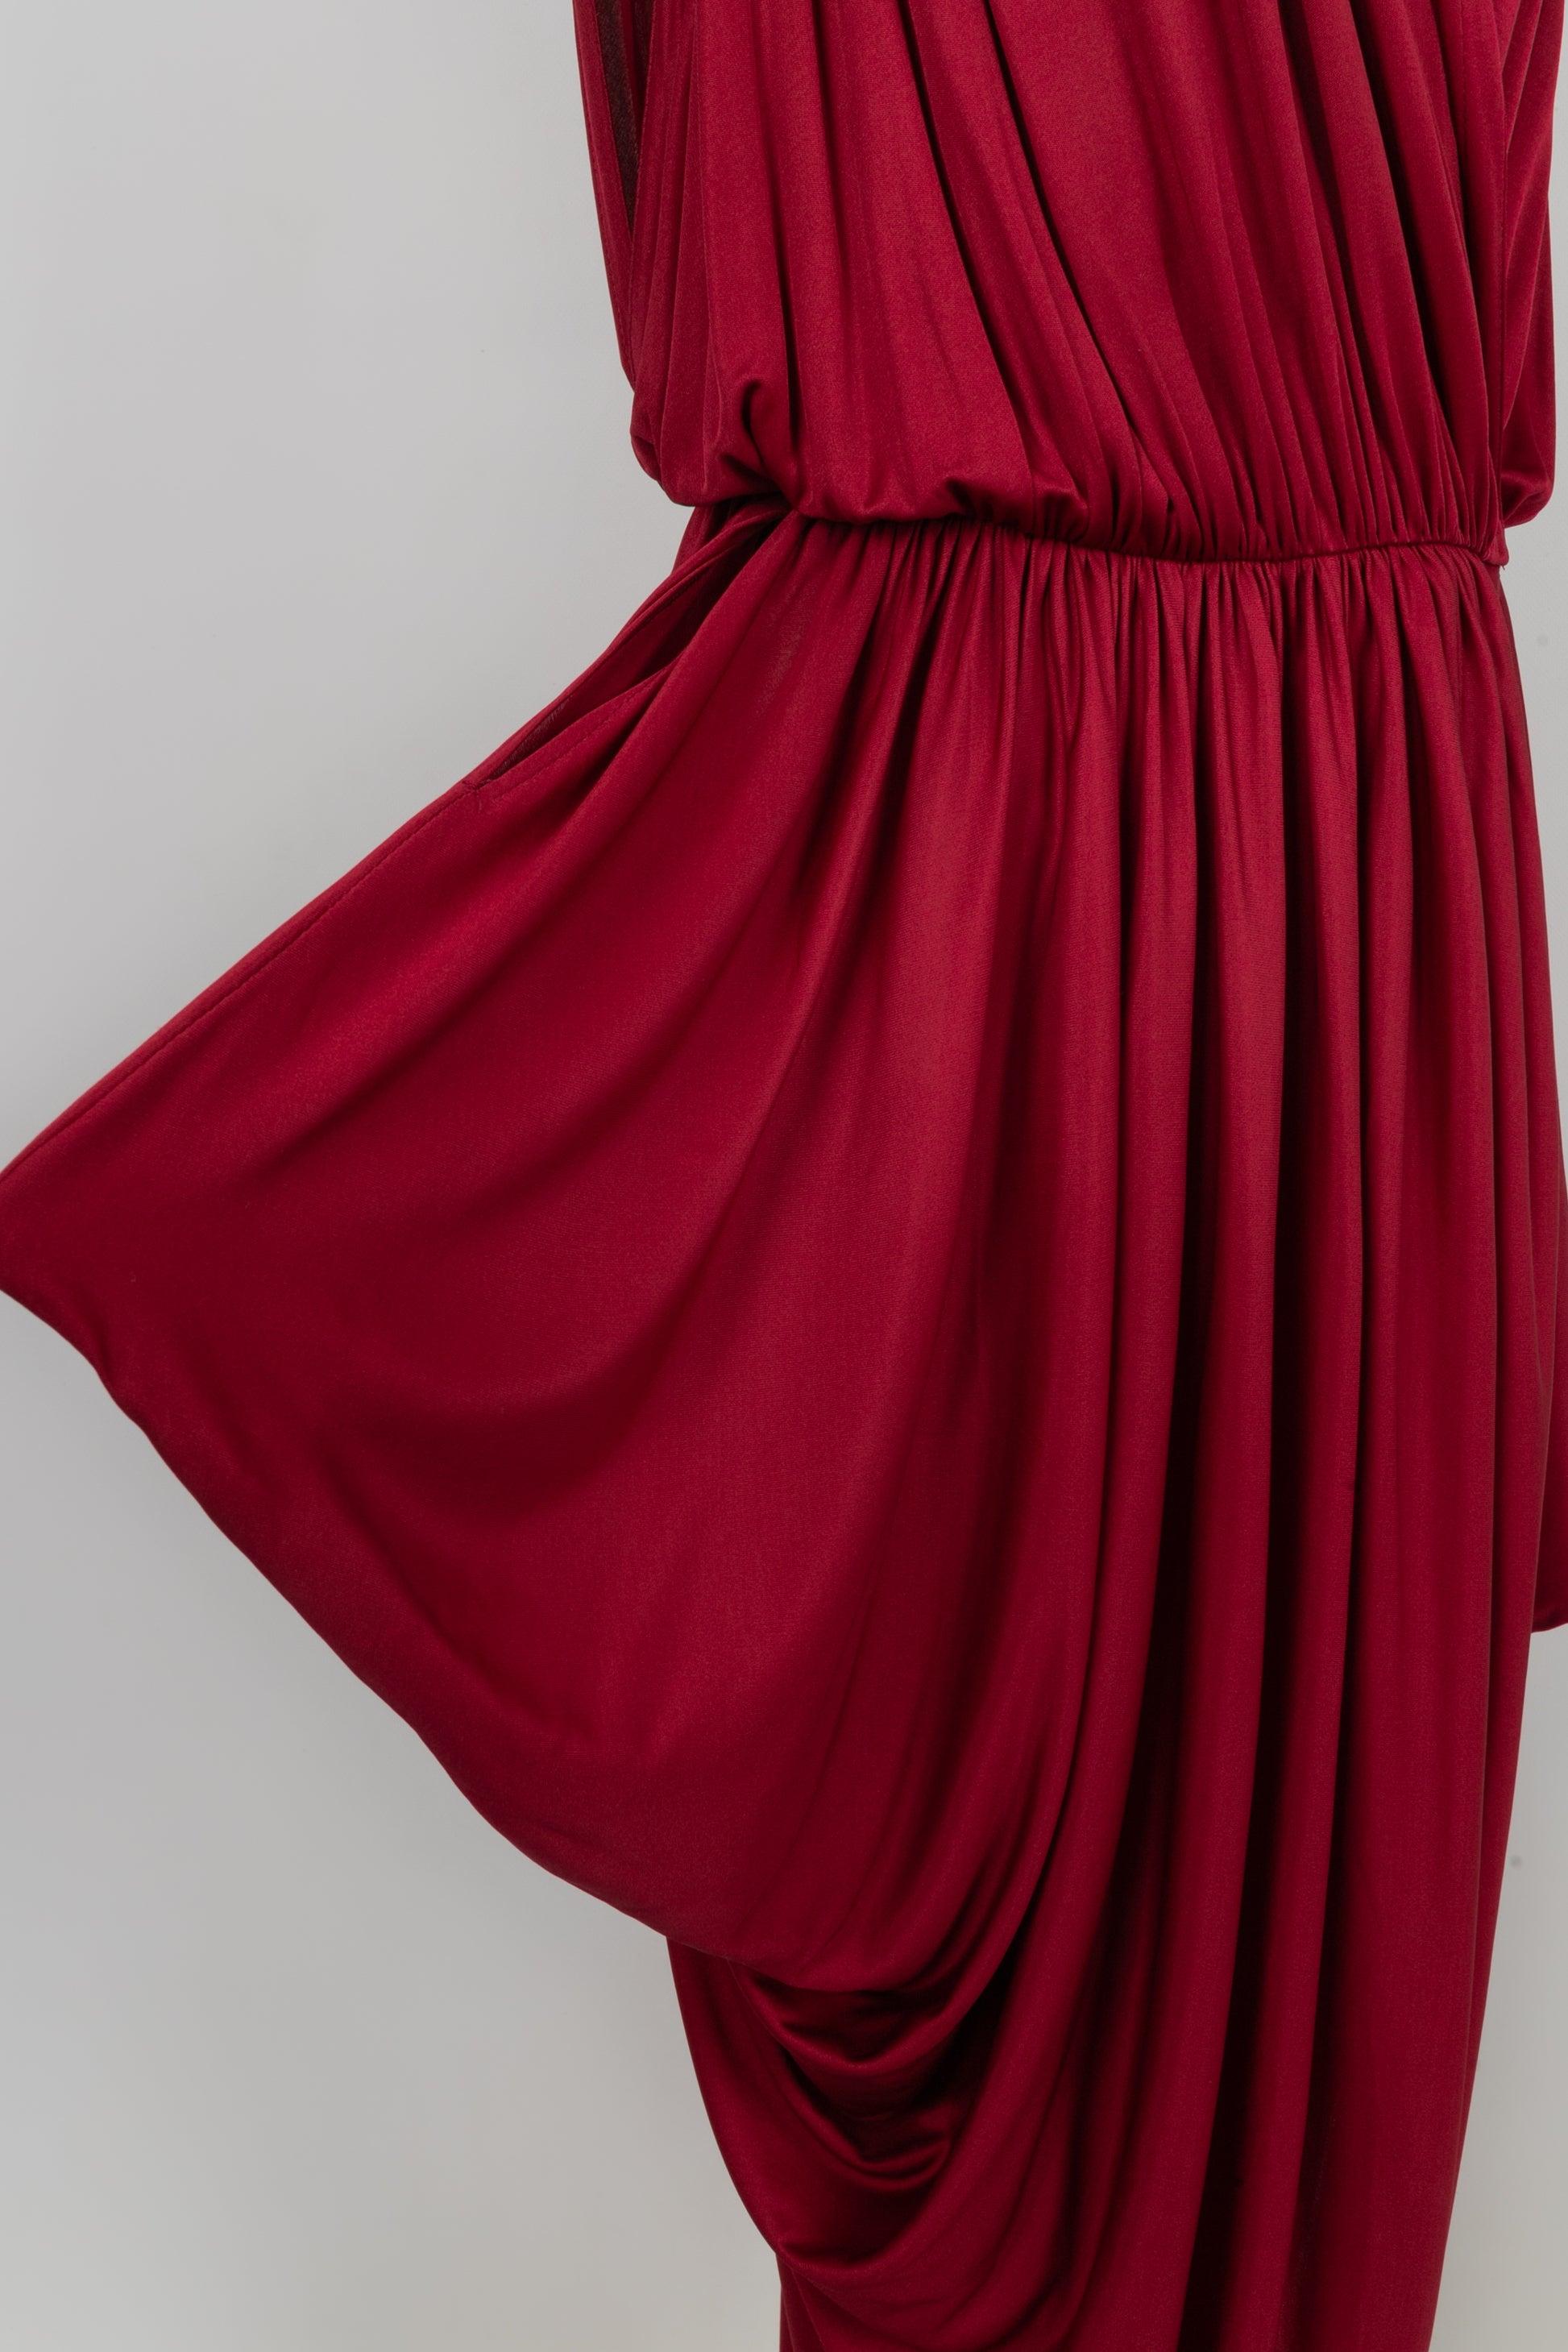 Gianni Versace Silk Pleated Dress, 1980s For Sale 1